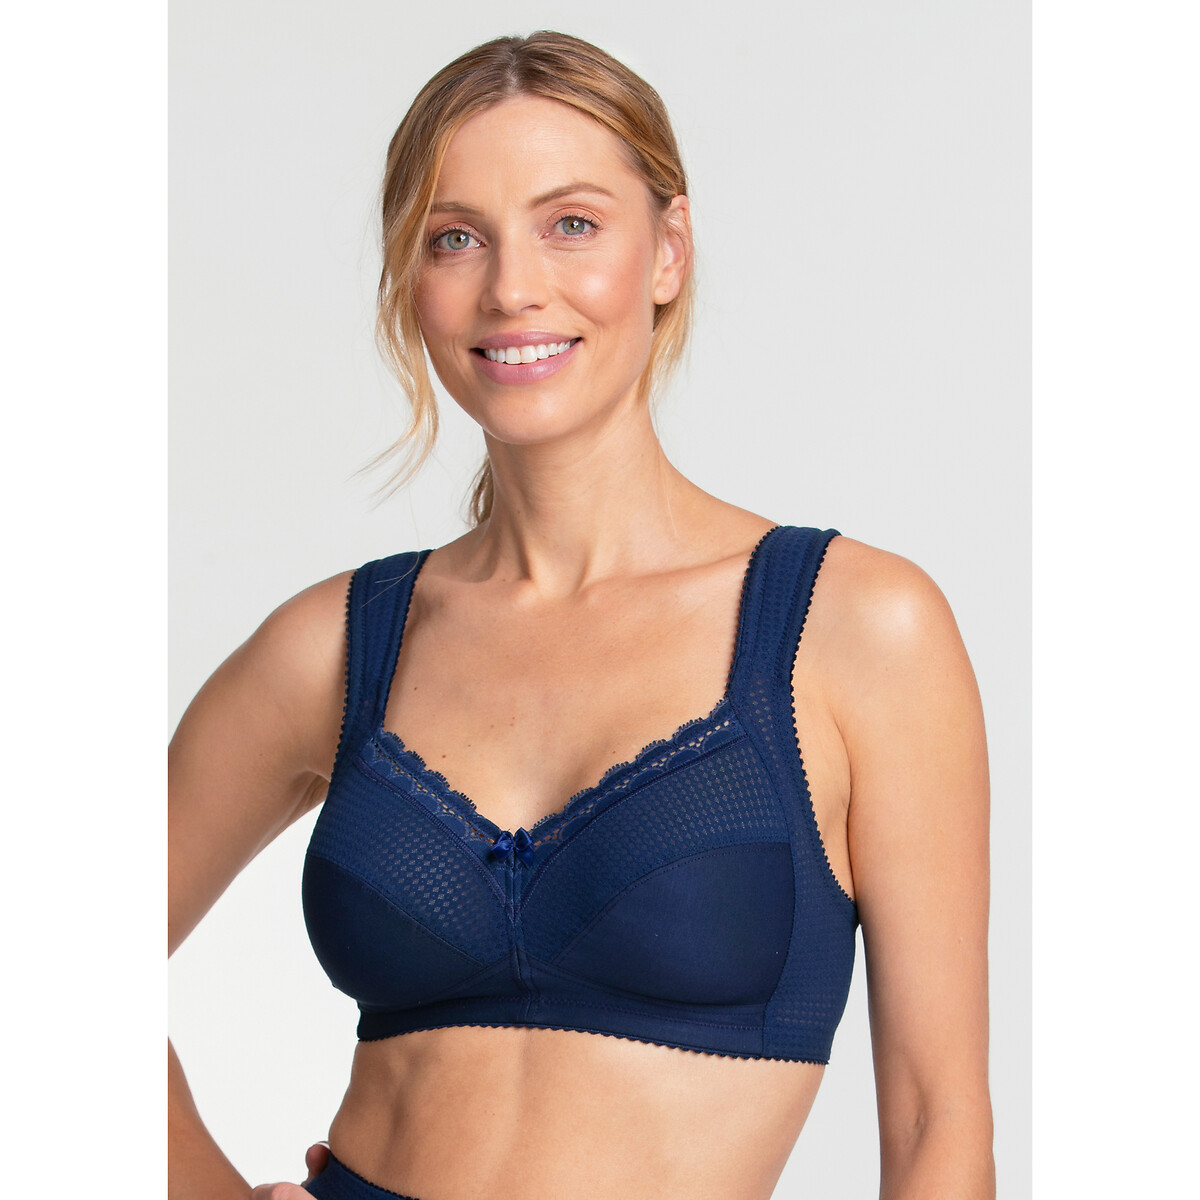 Miss Mary of Sweden Stay Fresh Underwired Moulded Strap Bra - Black